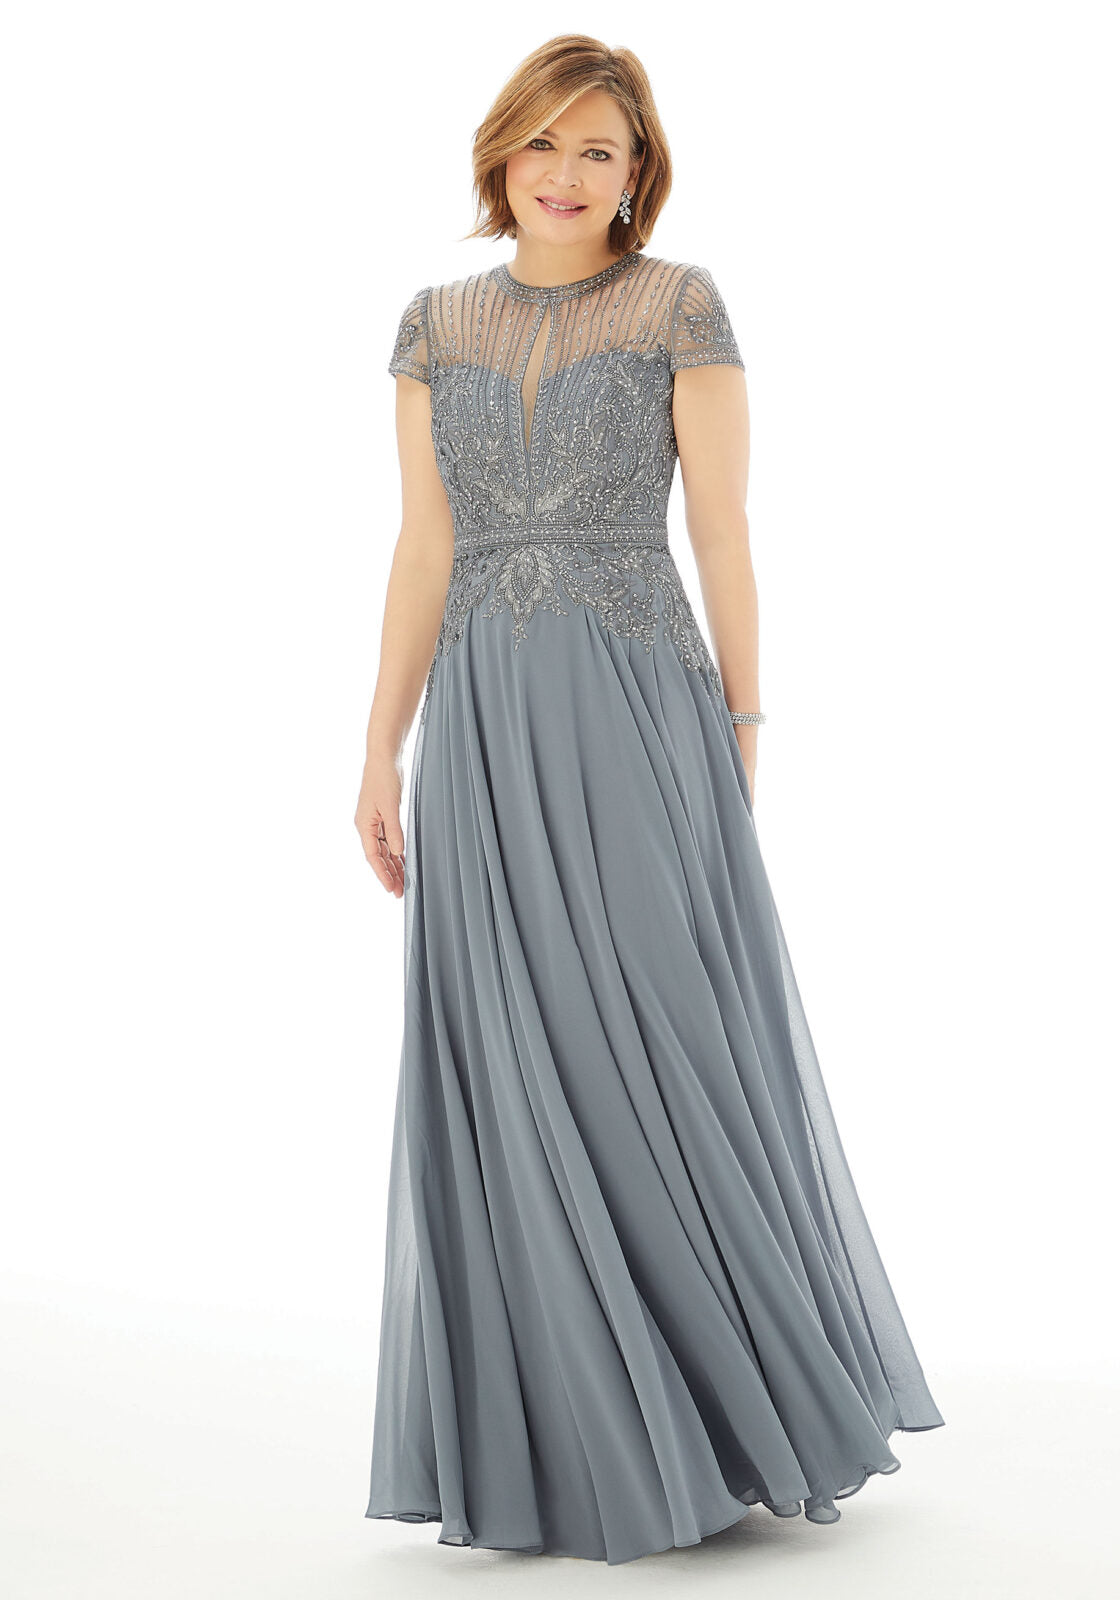 A-line Evening Gown With Embroidery And Beading On Chiffon Morilee